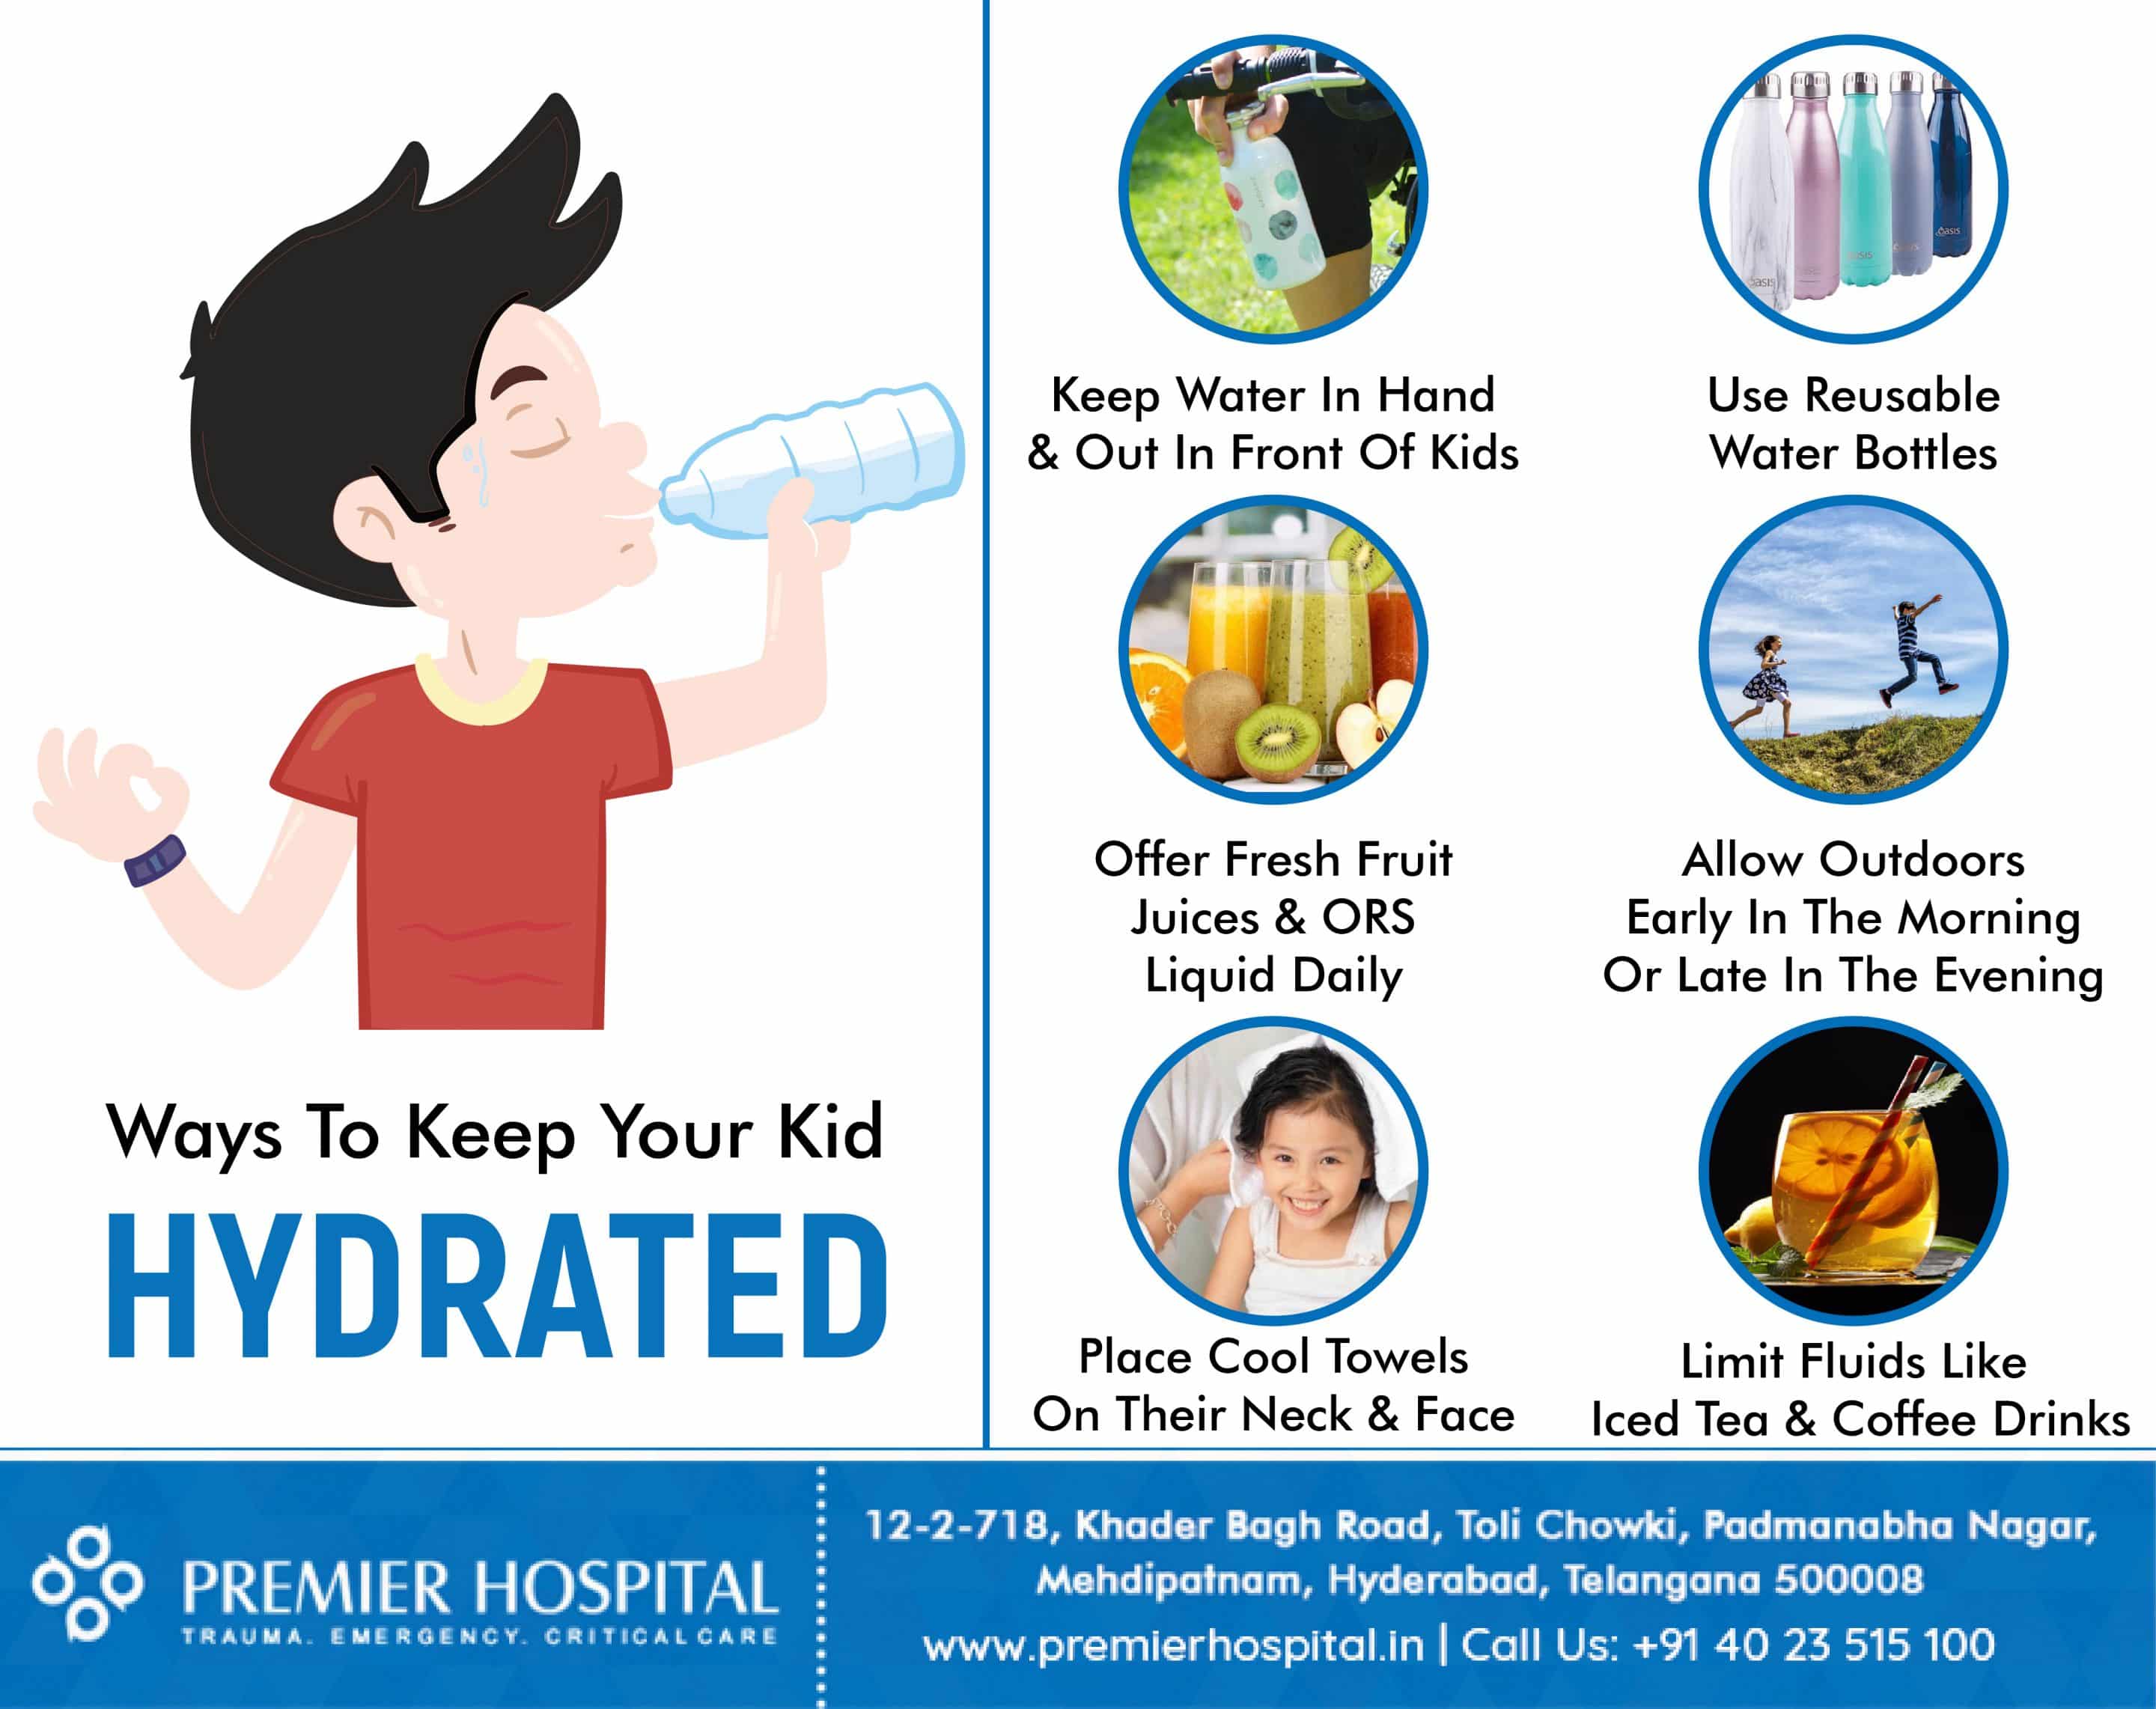 How to hydrate your kids in summer